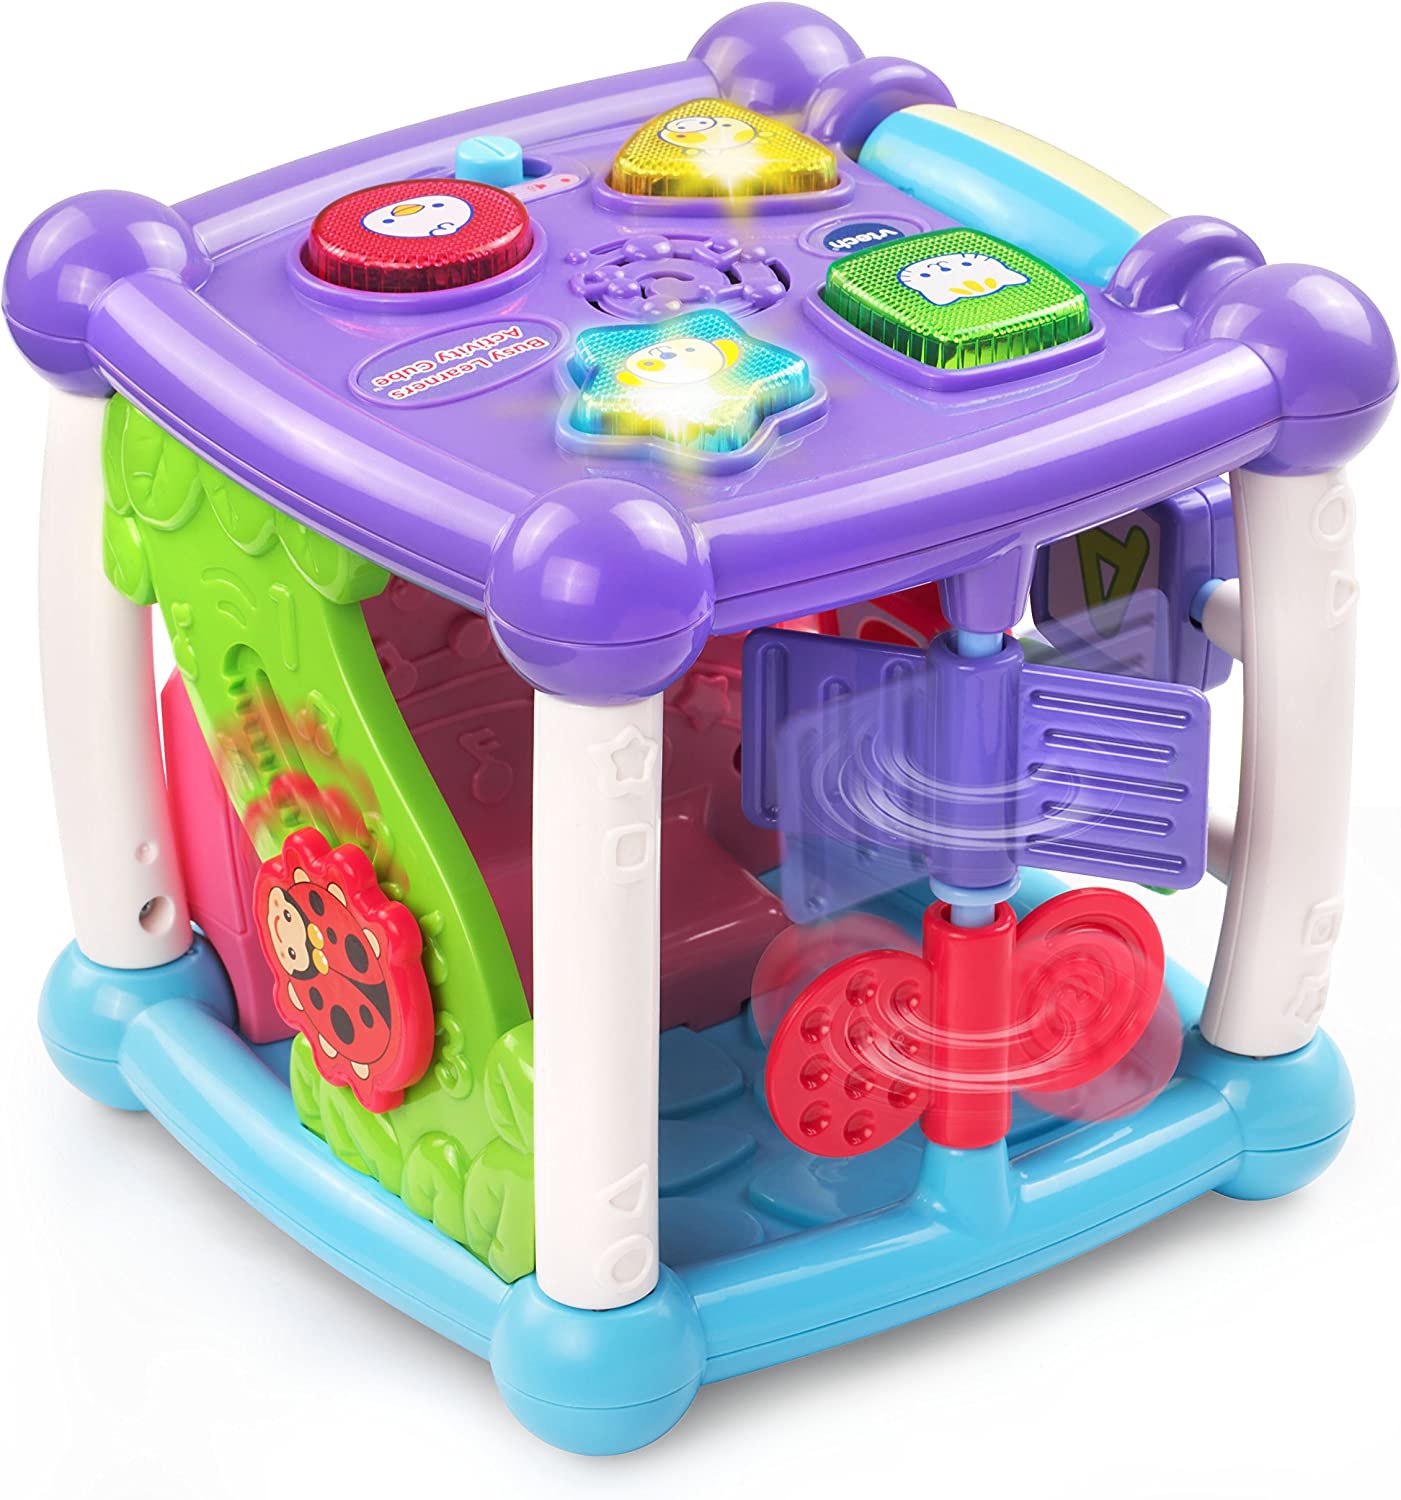 Busy Learners Activity Cube, Purple